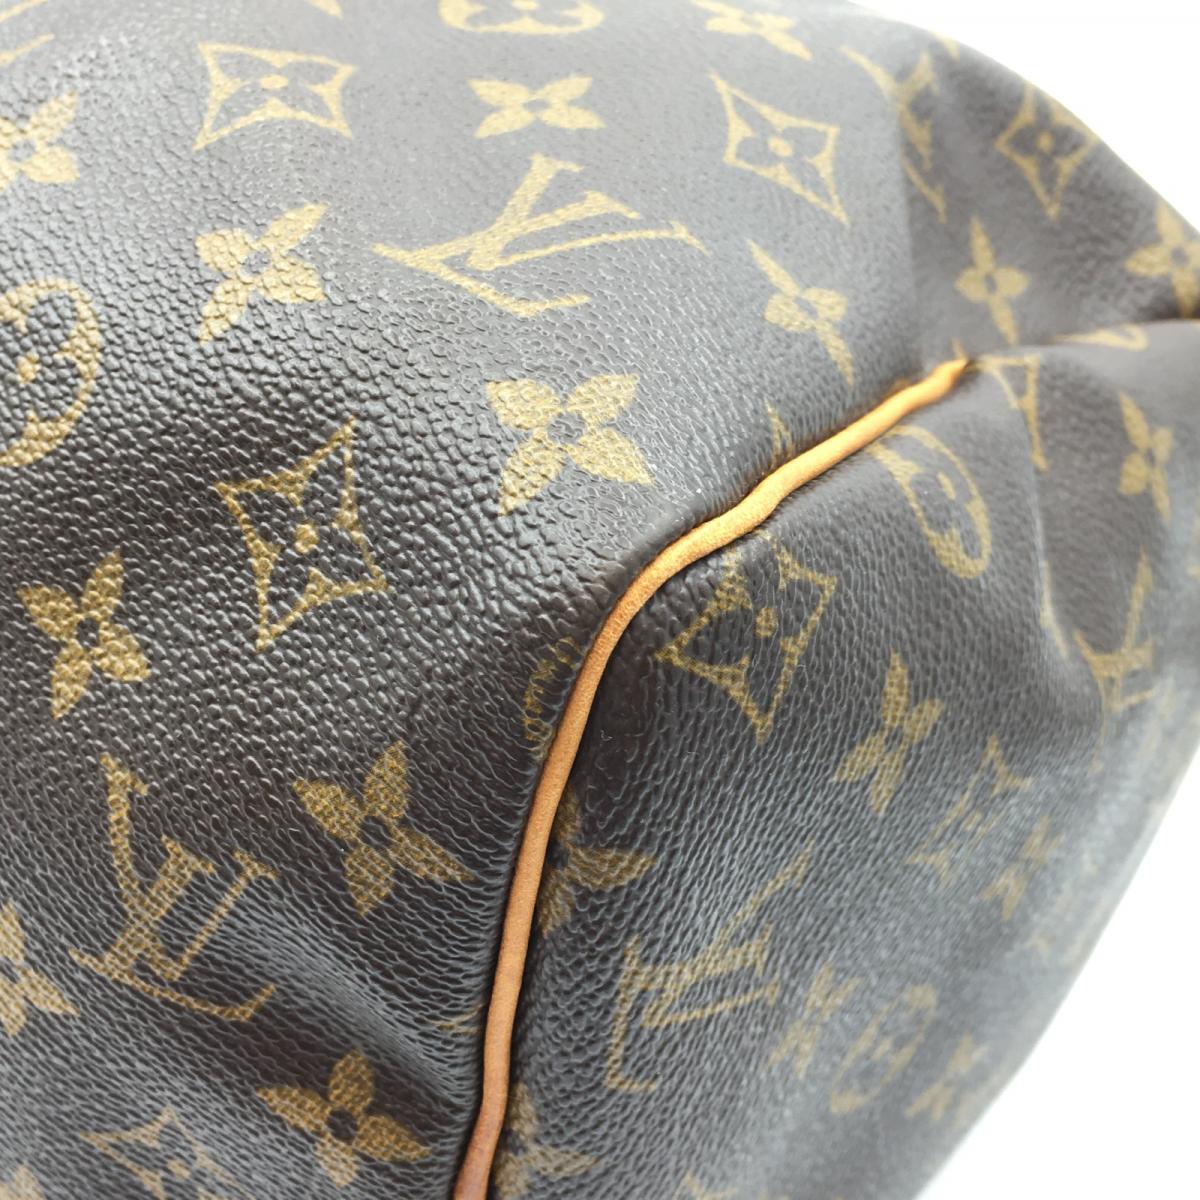 Authenticated Used Louis Vuitton M51683 New Wave Chain Bag